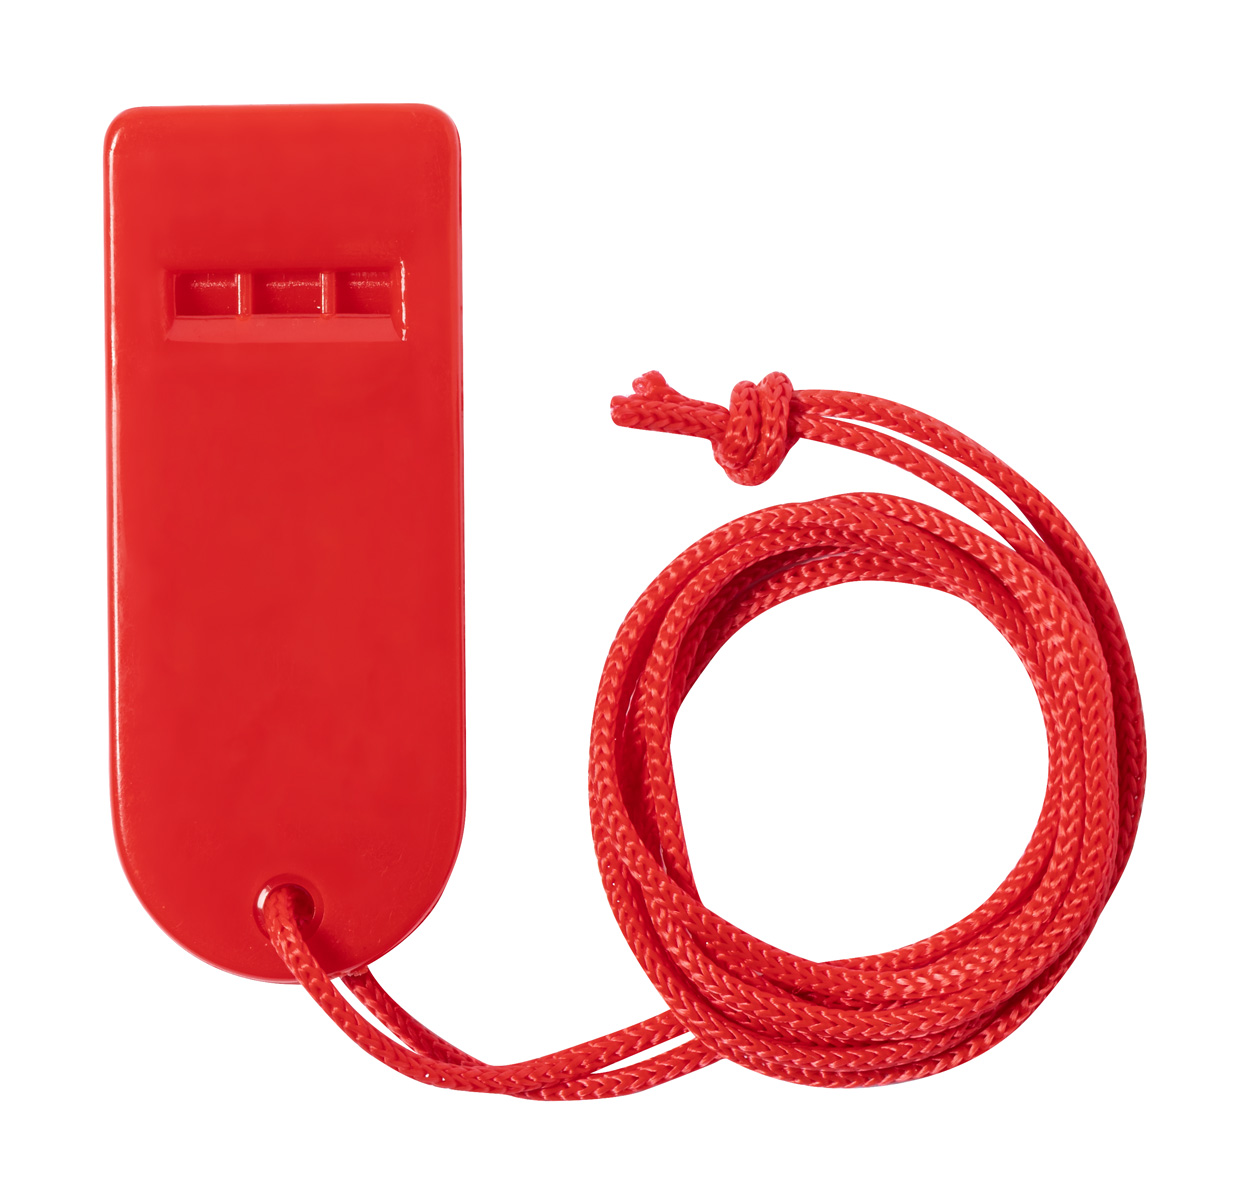 Forlong whistle - red